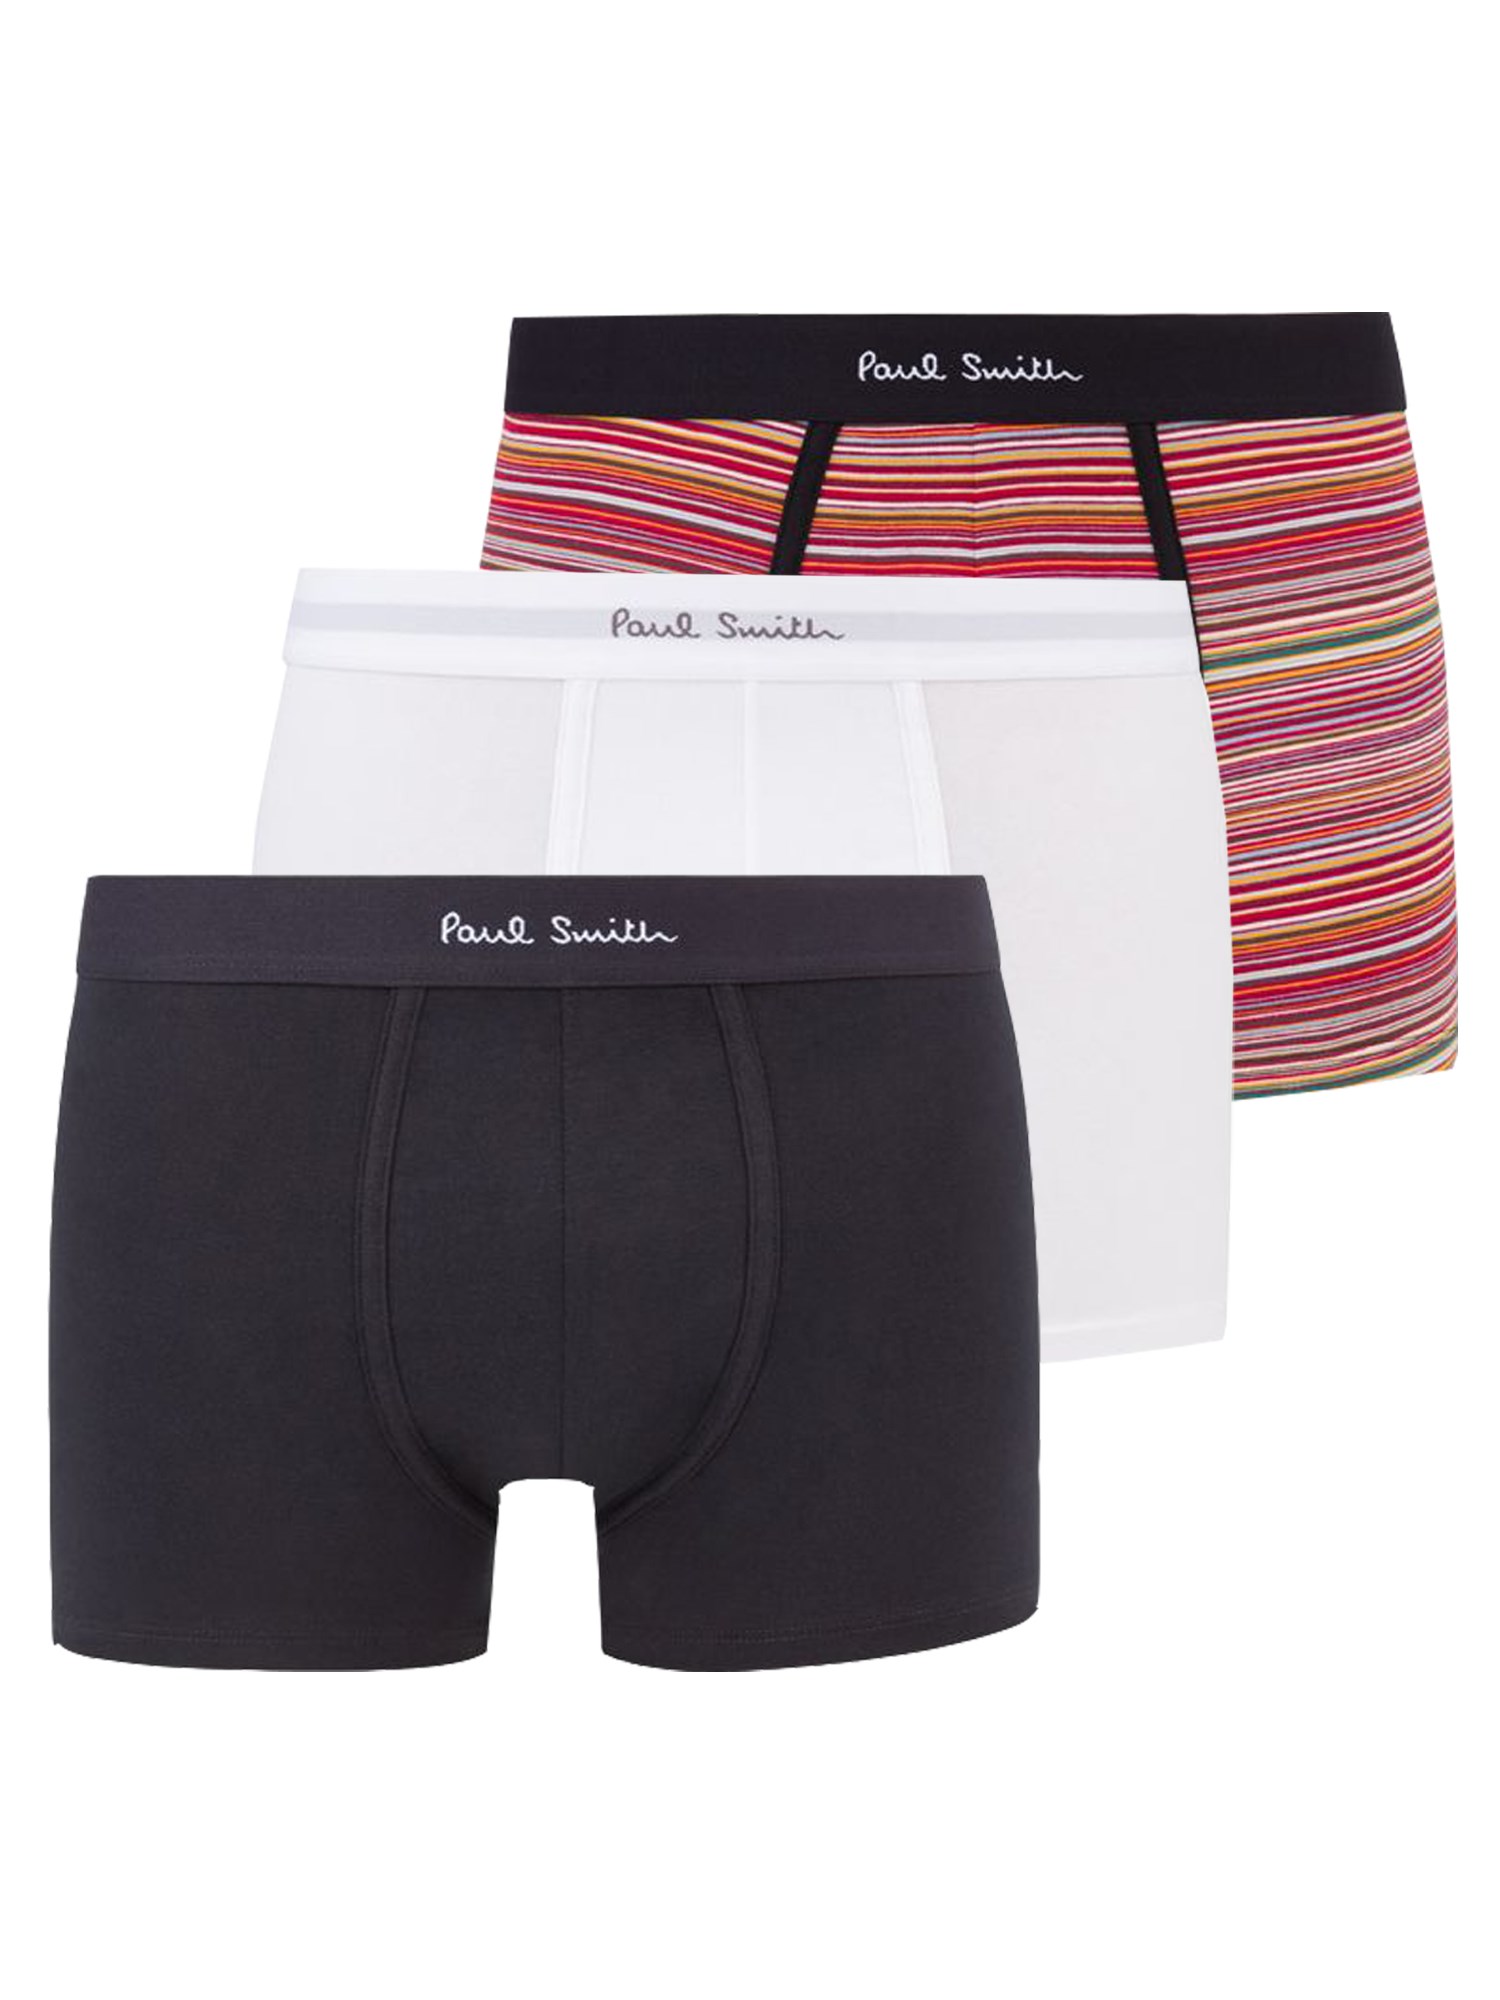 paul smith pack of three boxers